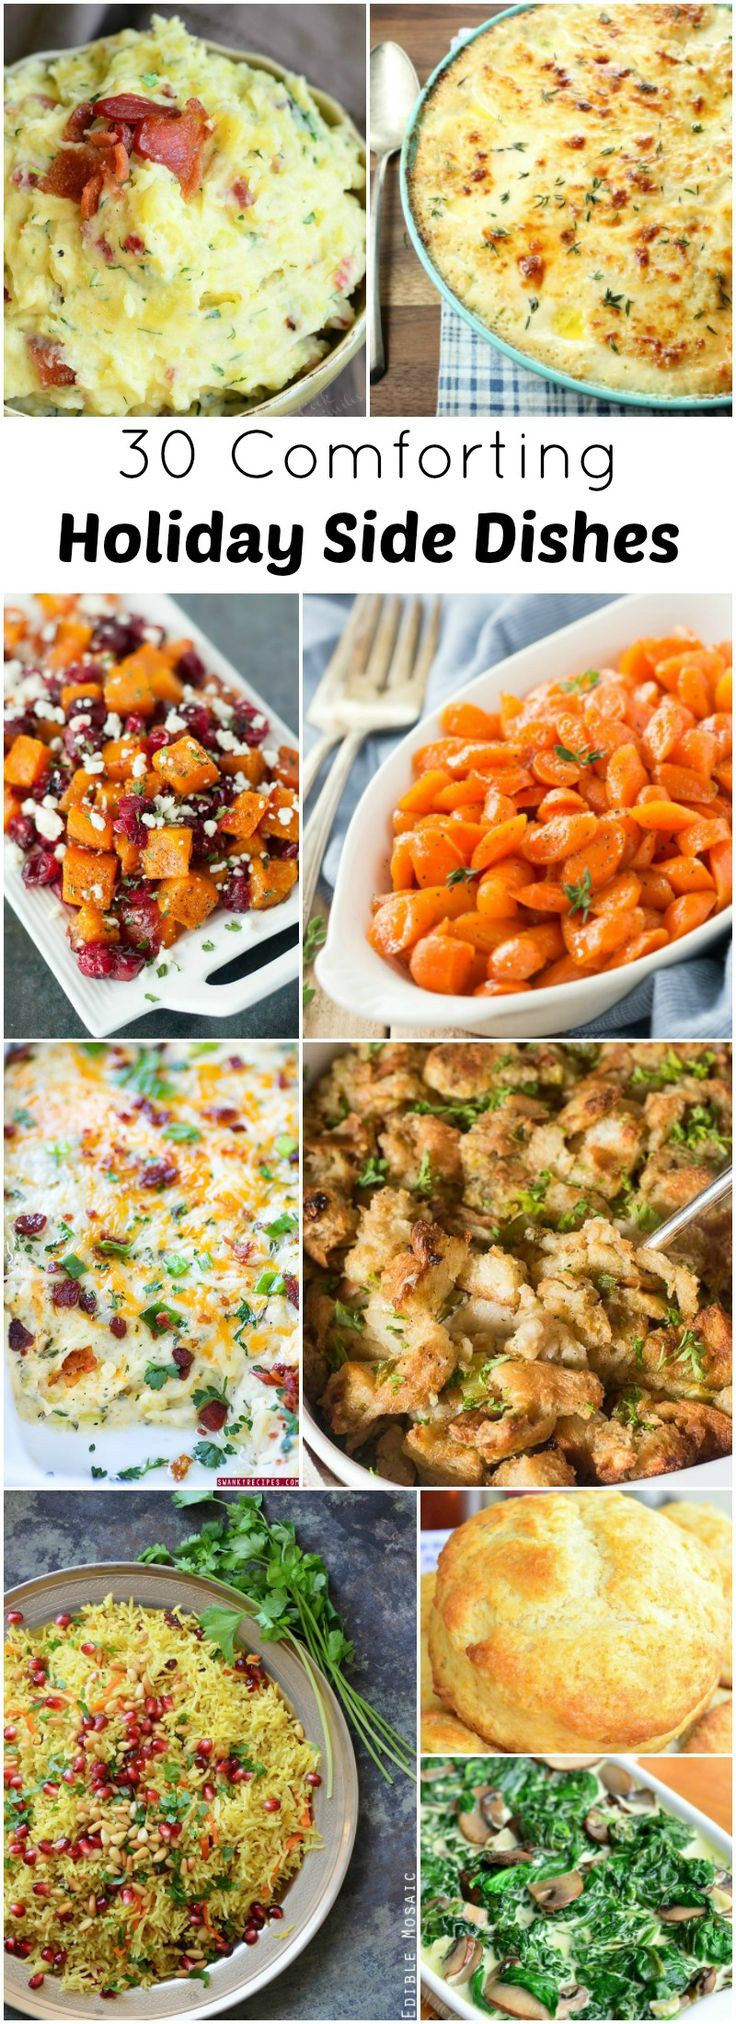 Side Dishes For Christmas Buffet
 Best 20 Holiday Side Dishes ideas on Pinterest